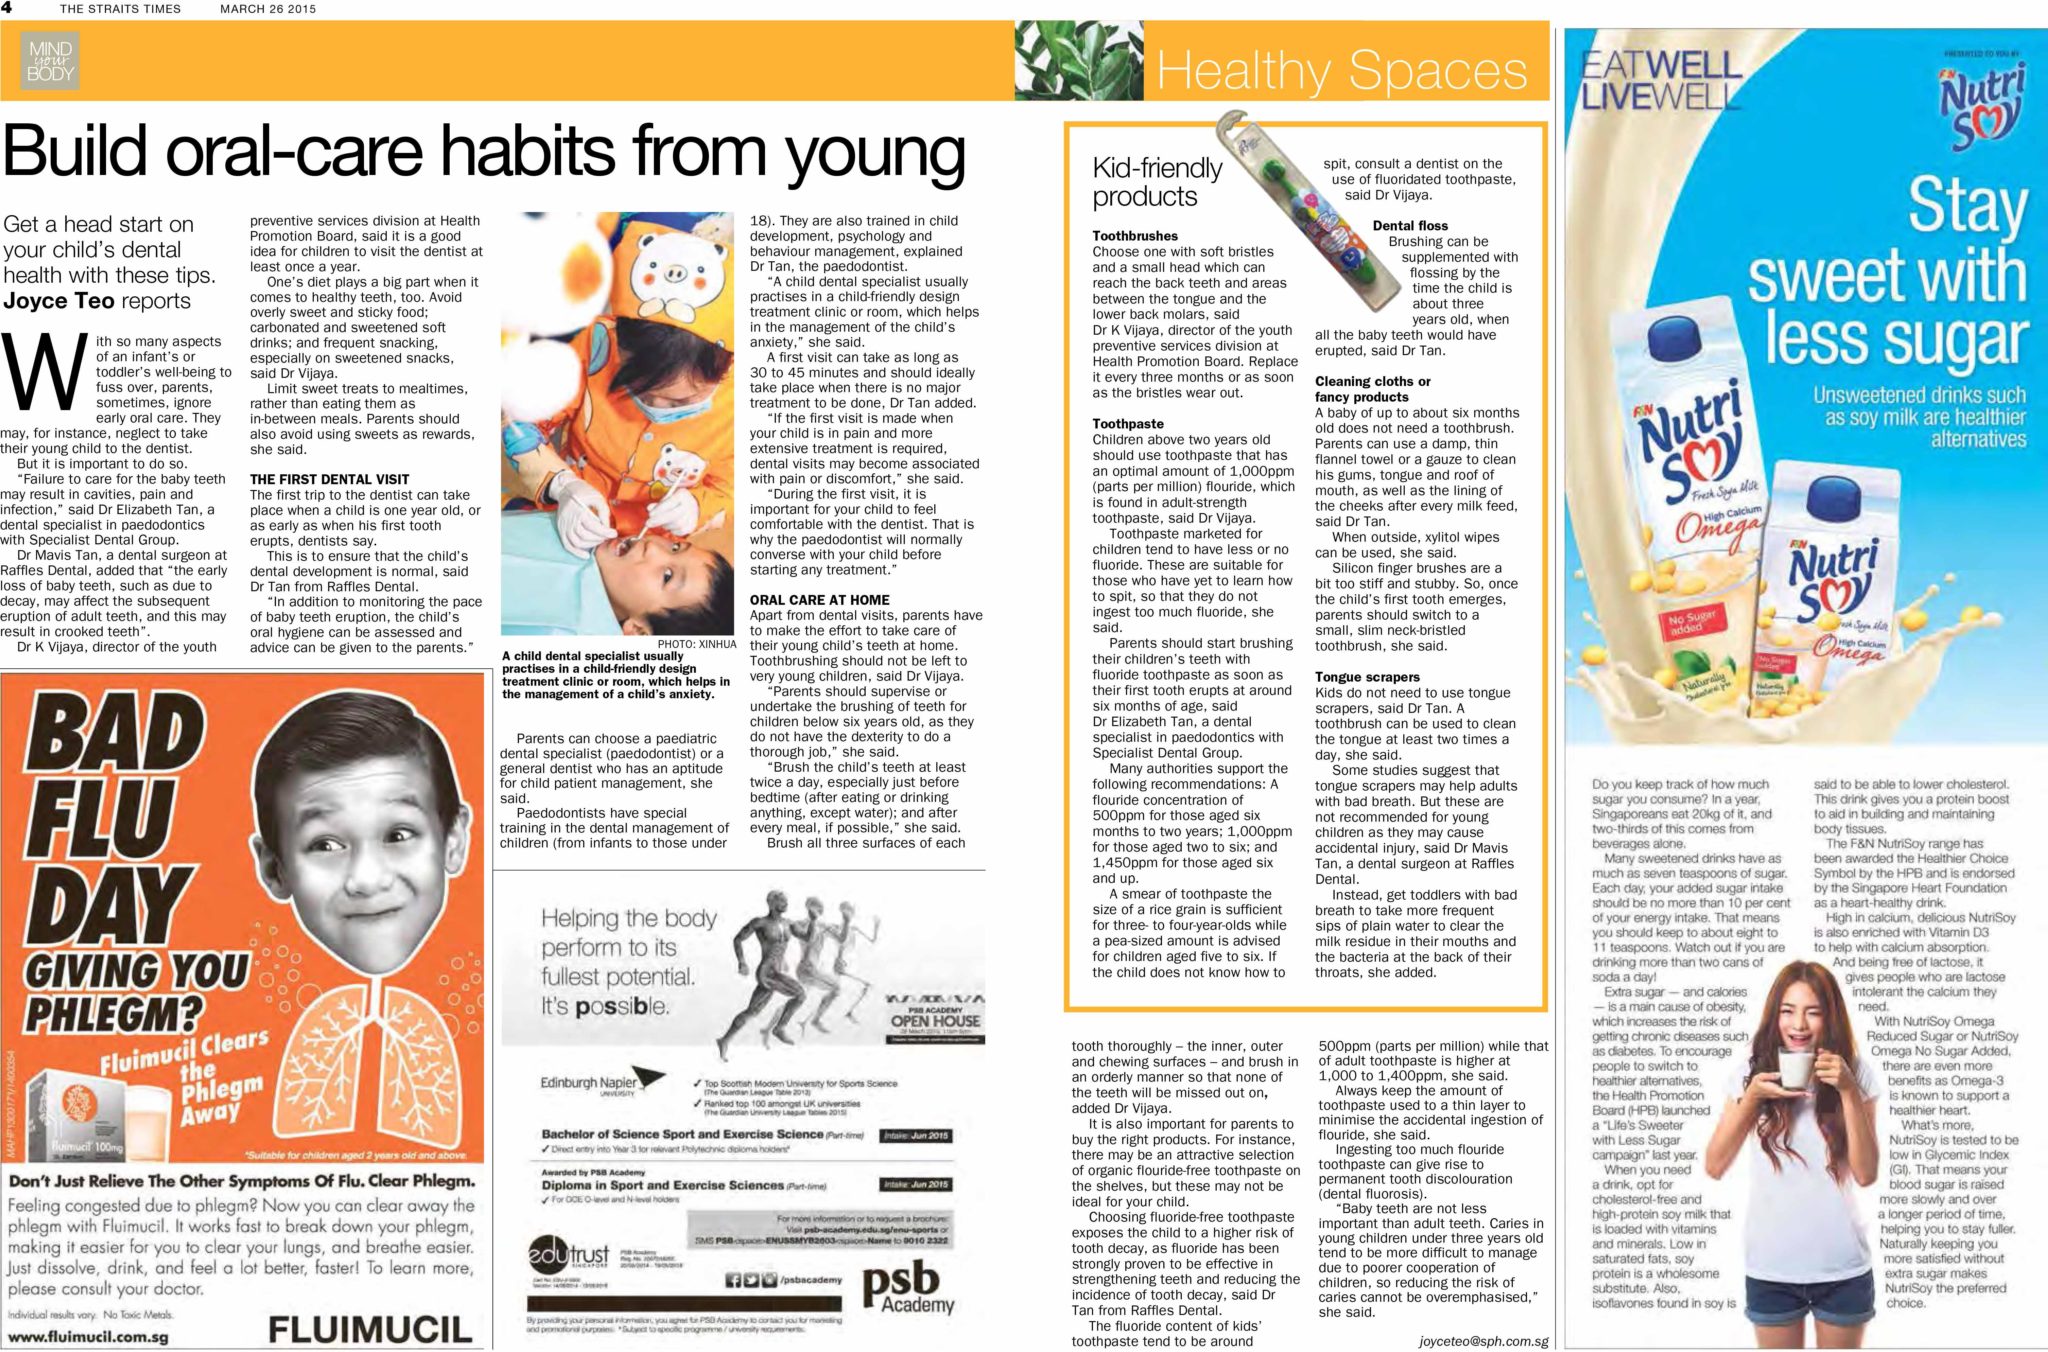 The Straits Times, Mind Your Body, March 26, 2015: “Build Oral-Care Habits from Young”